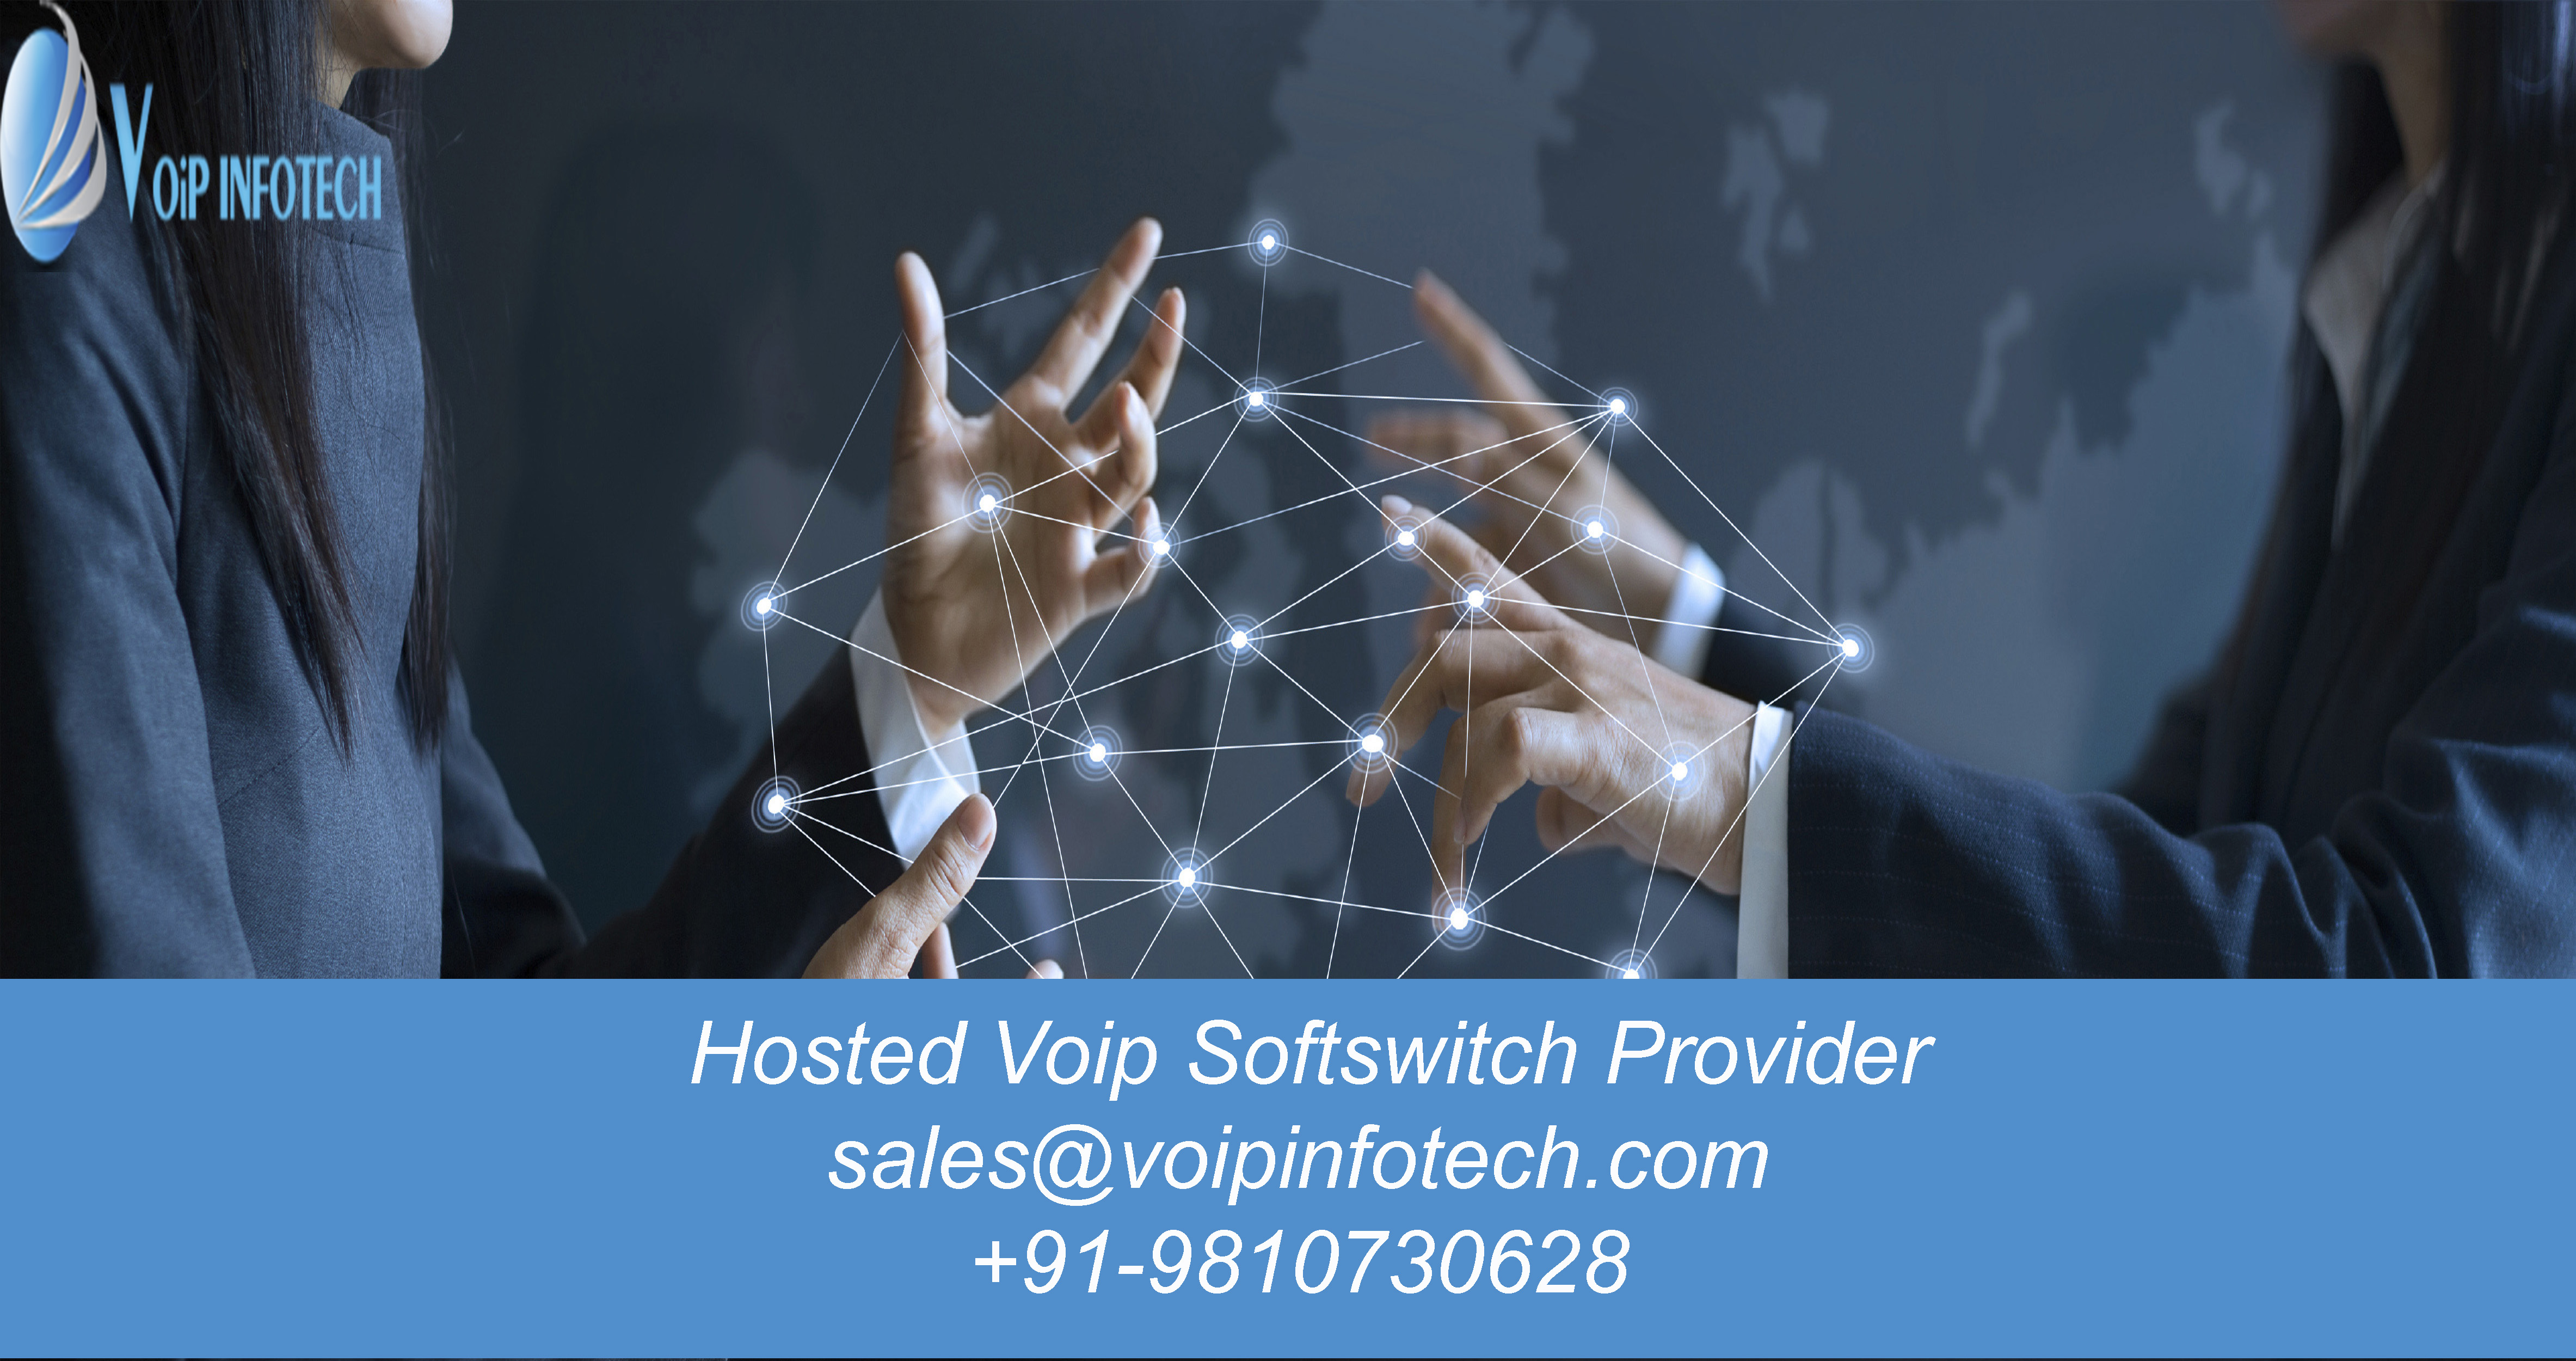 hosted voip softswitch providerrr.jpg